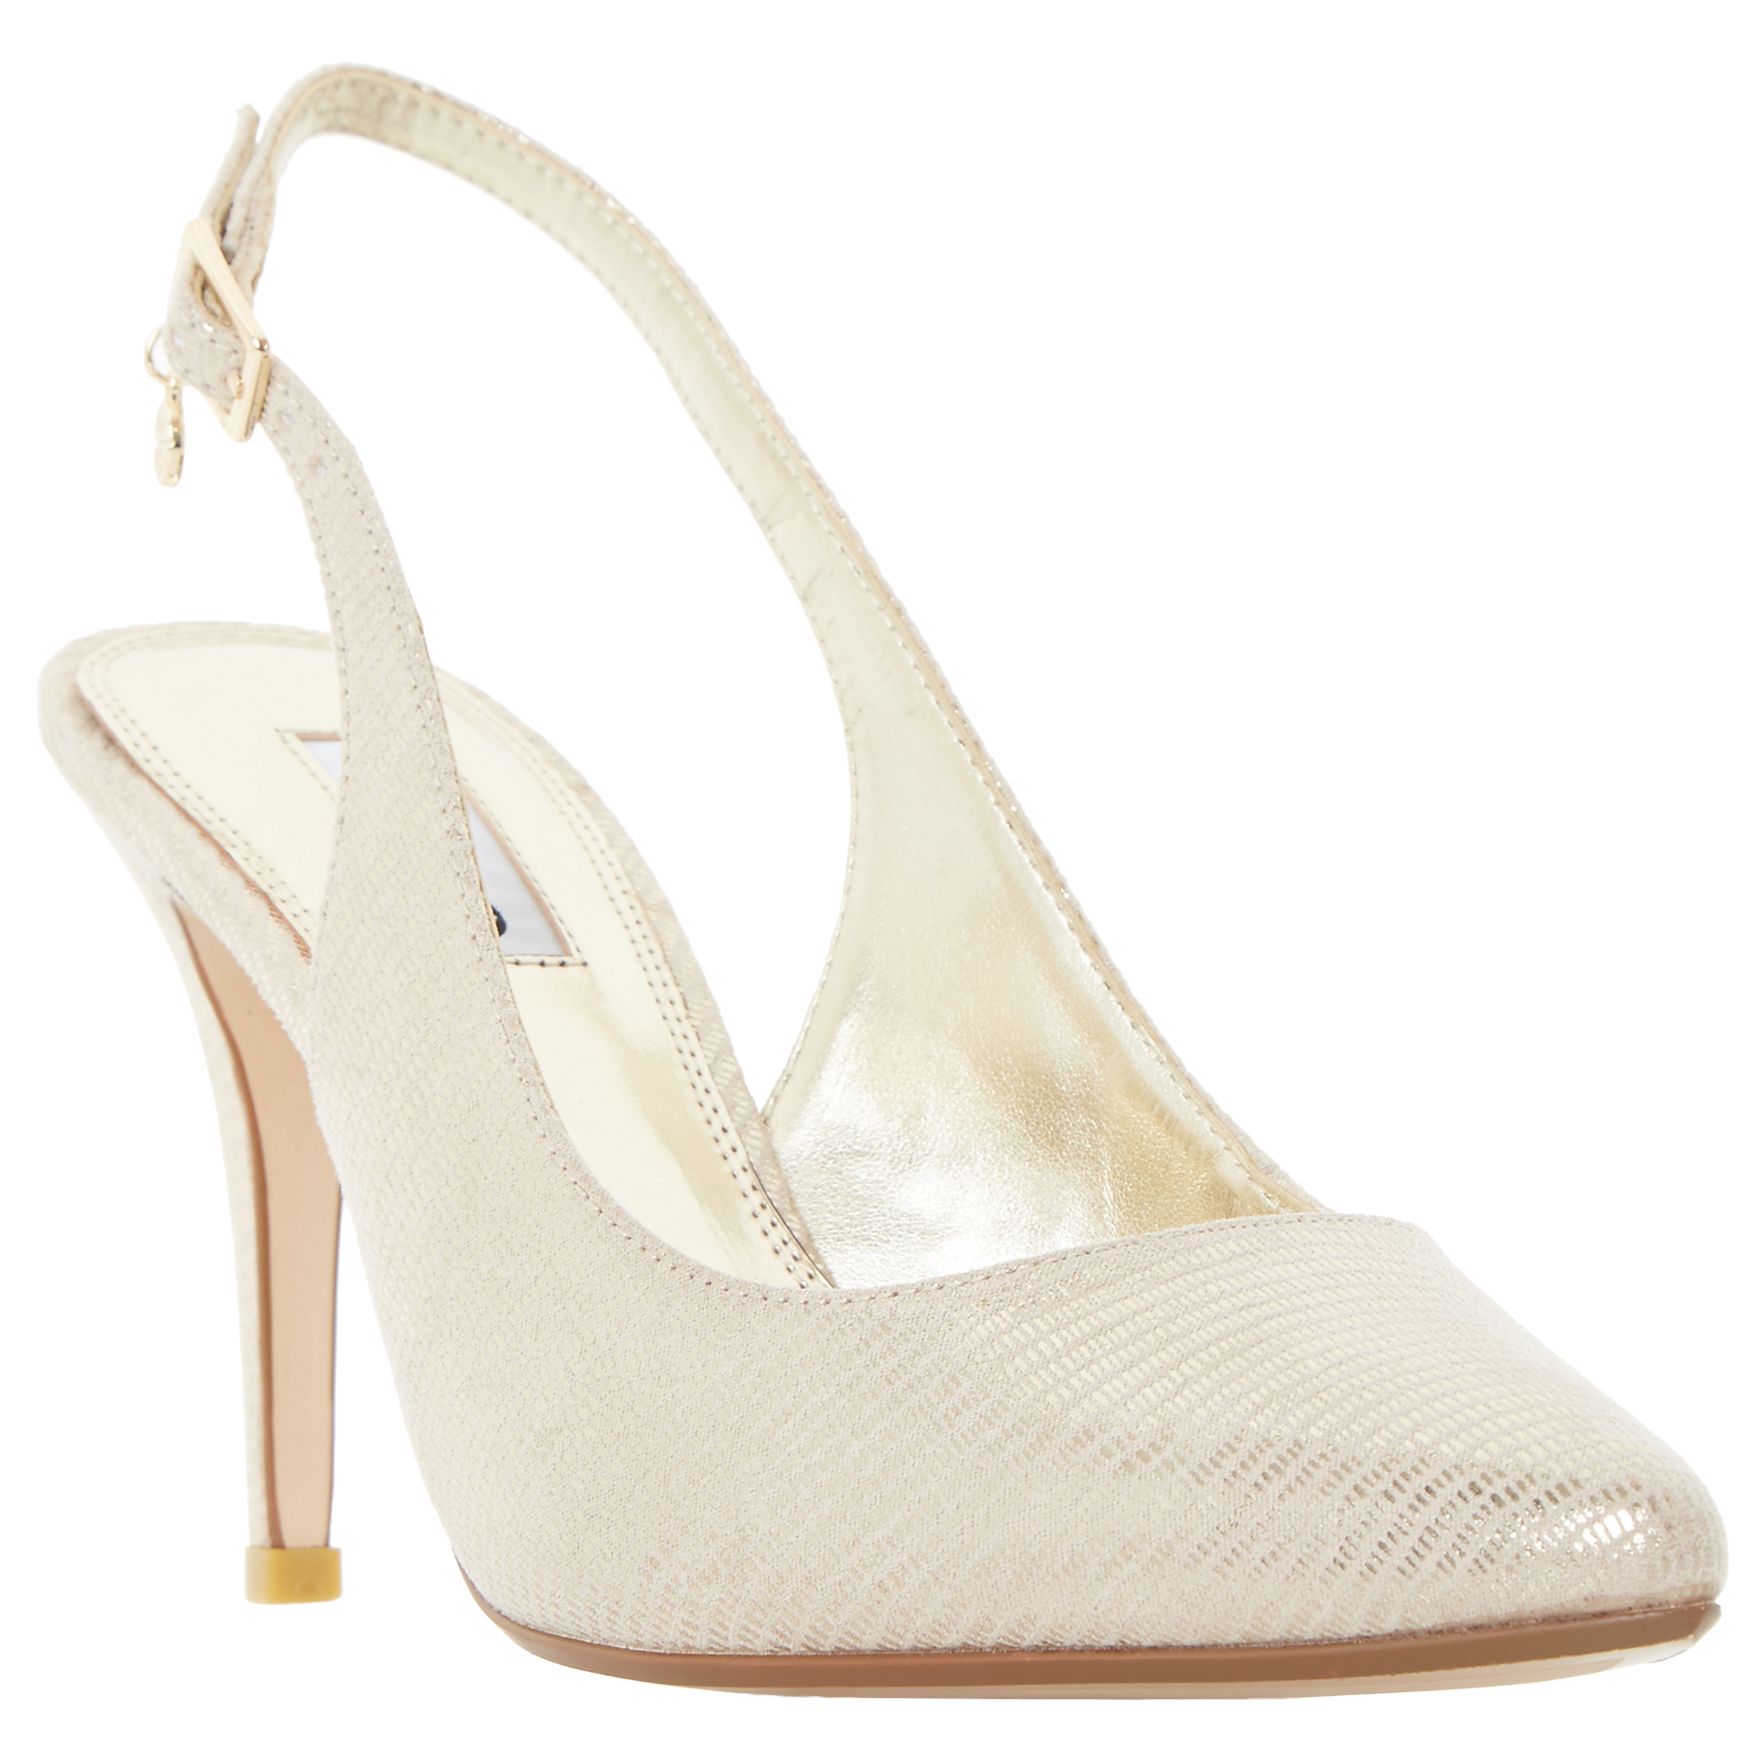 Dune Cathy Slingback High Heel Court Shoes at John Lewis & Partners